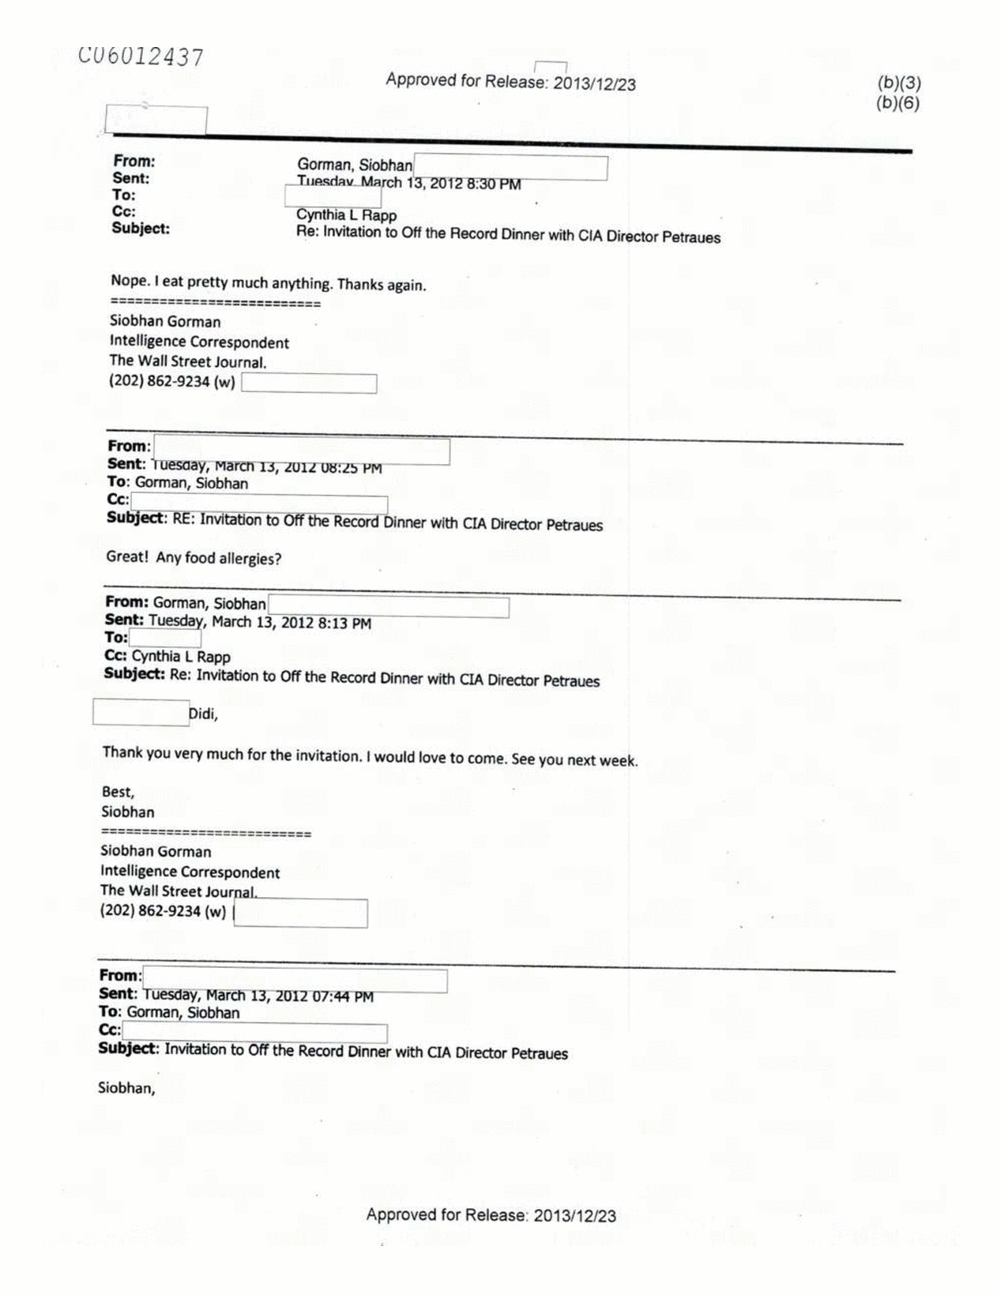 Page 18 from Email Correspondence Between Reporters and CIA Flacks